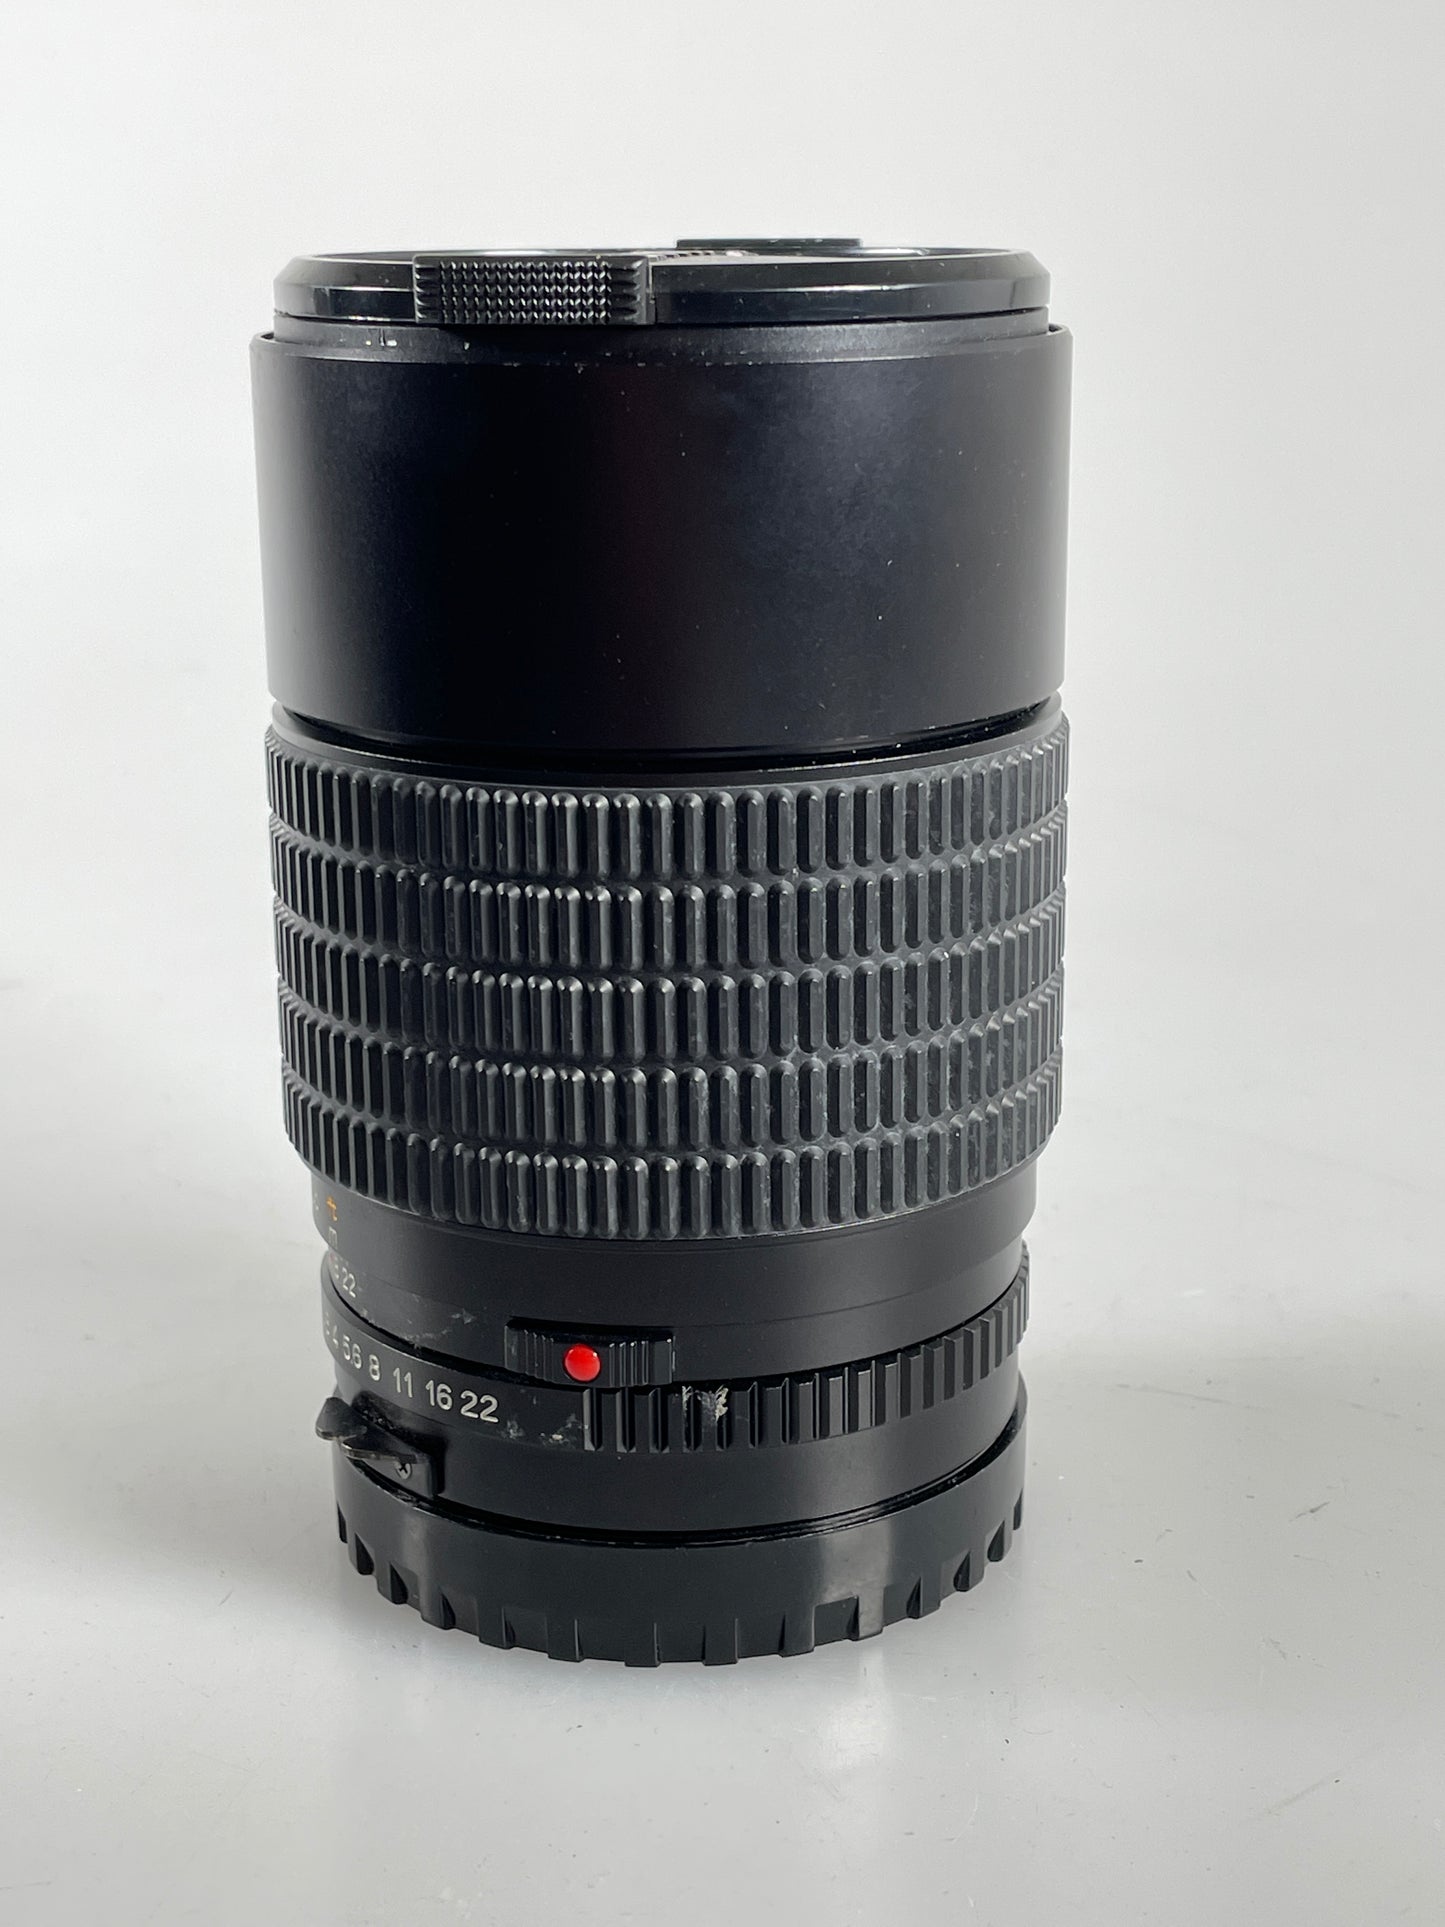 Mamiya A 150mm f/2.8 Lens for M645 1000S Super Pro TL